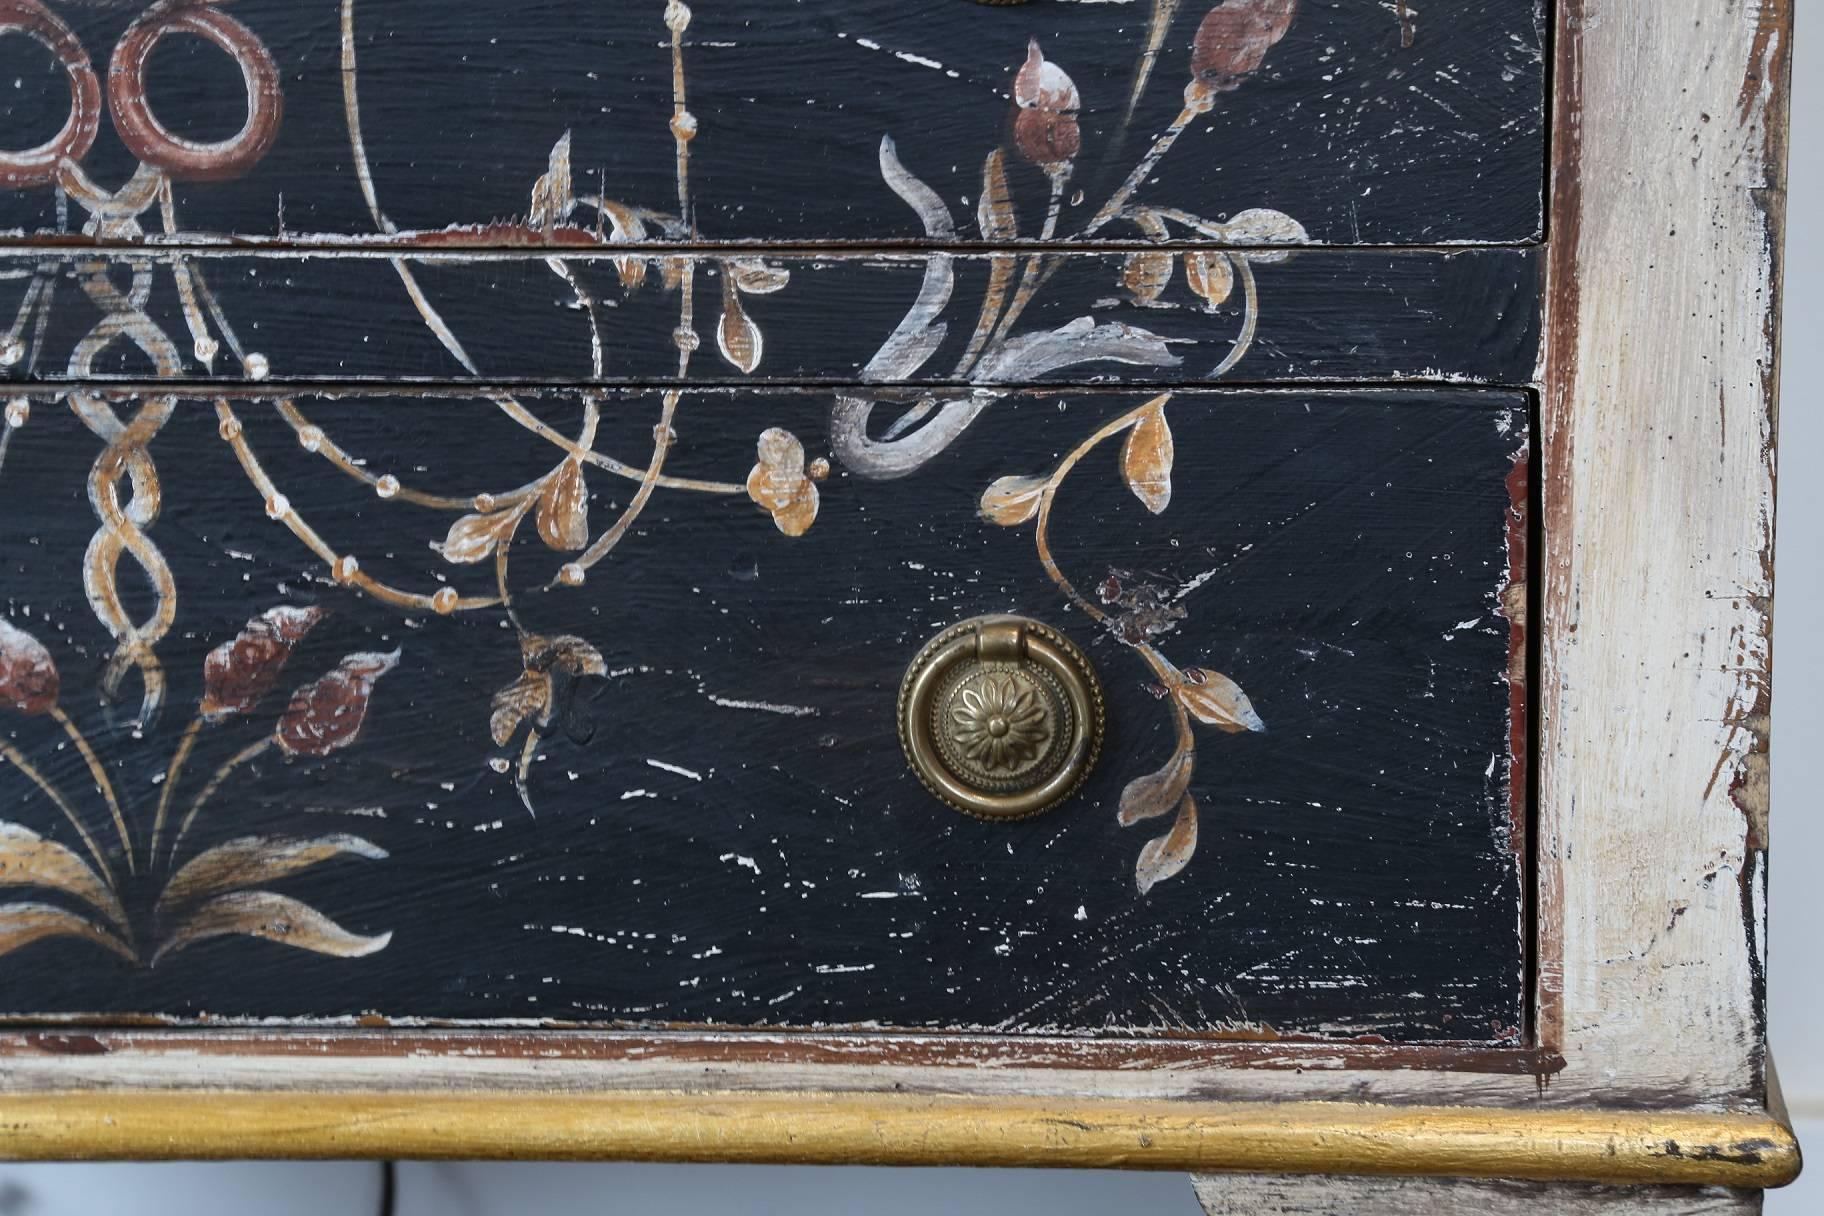 Hand-painted three-drawer chest in distressed ivory, black and gold colors with urn and floral decoration on front, top and sides. Brass accents, Italy.